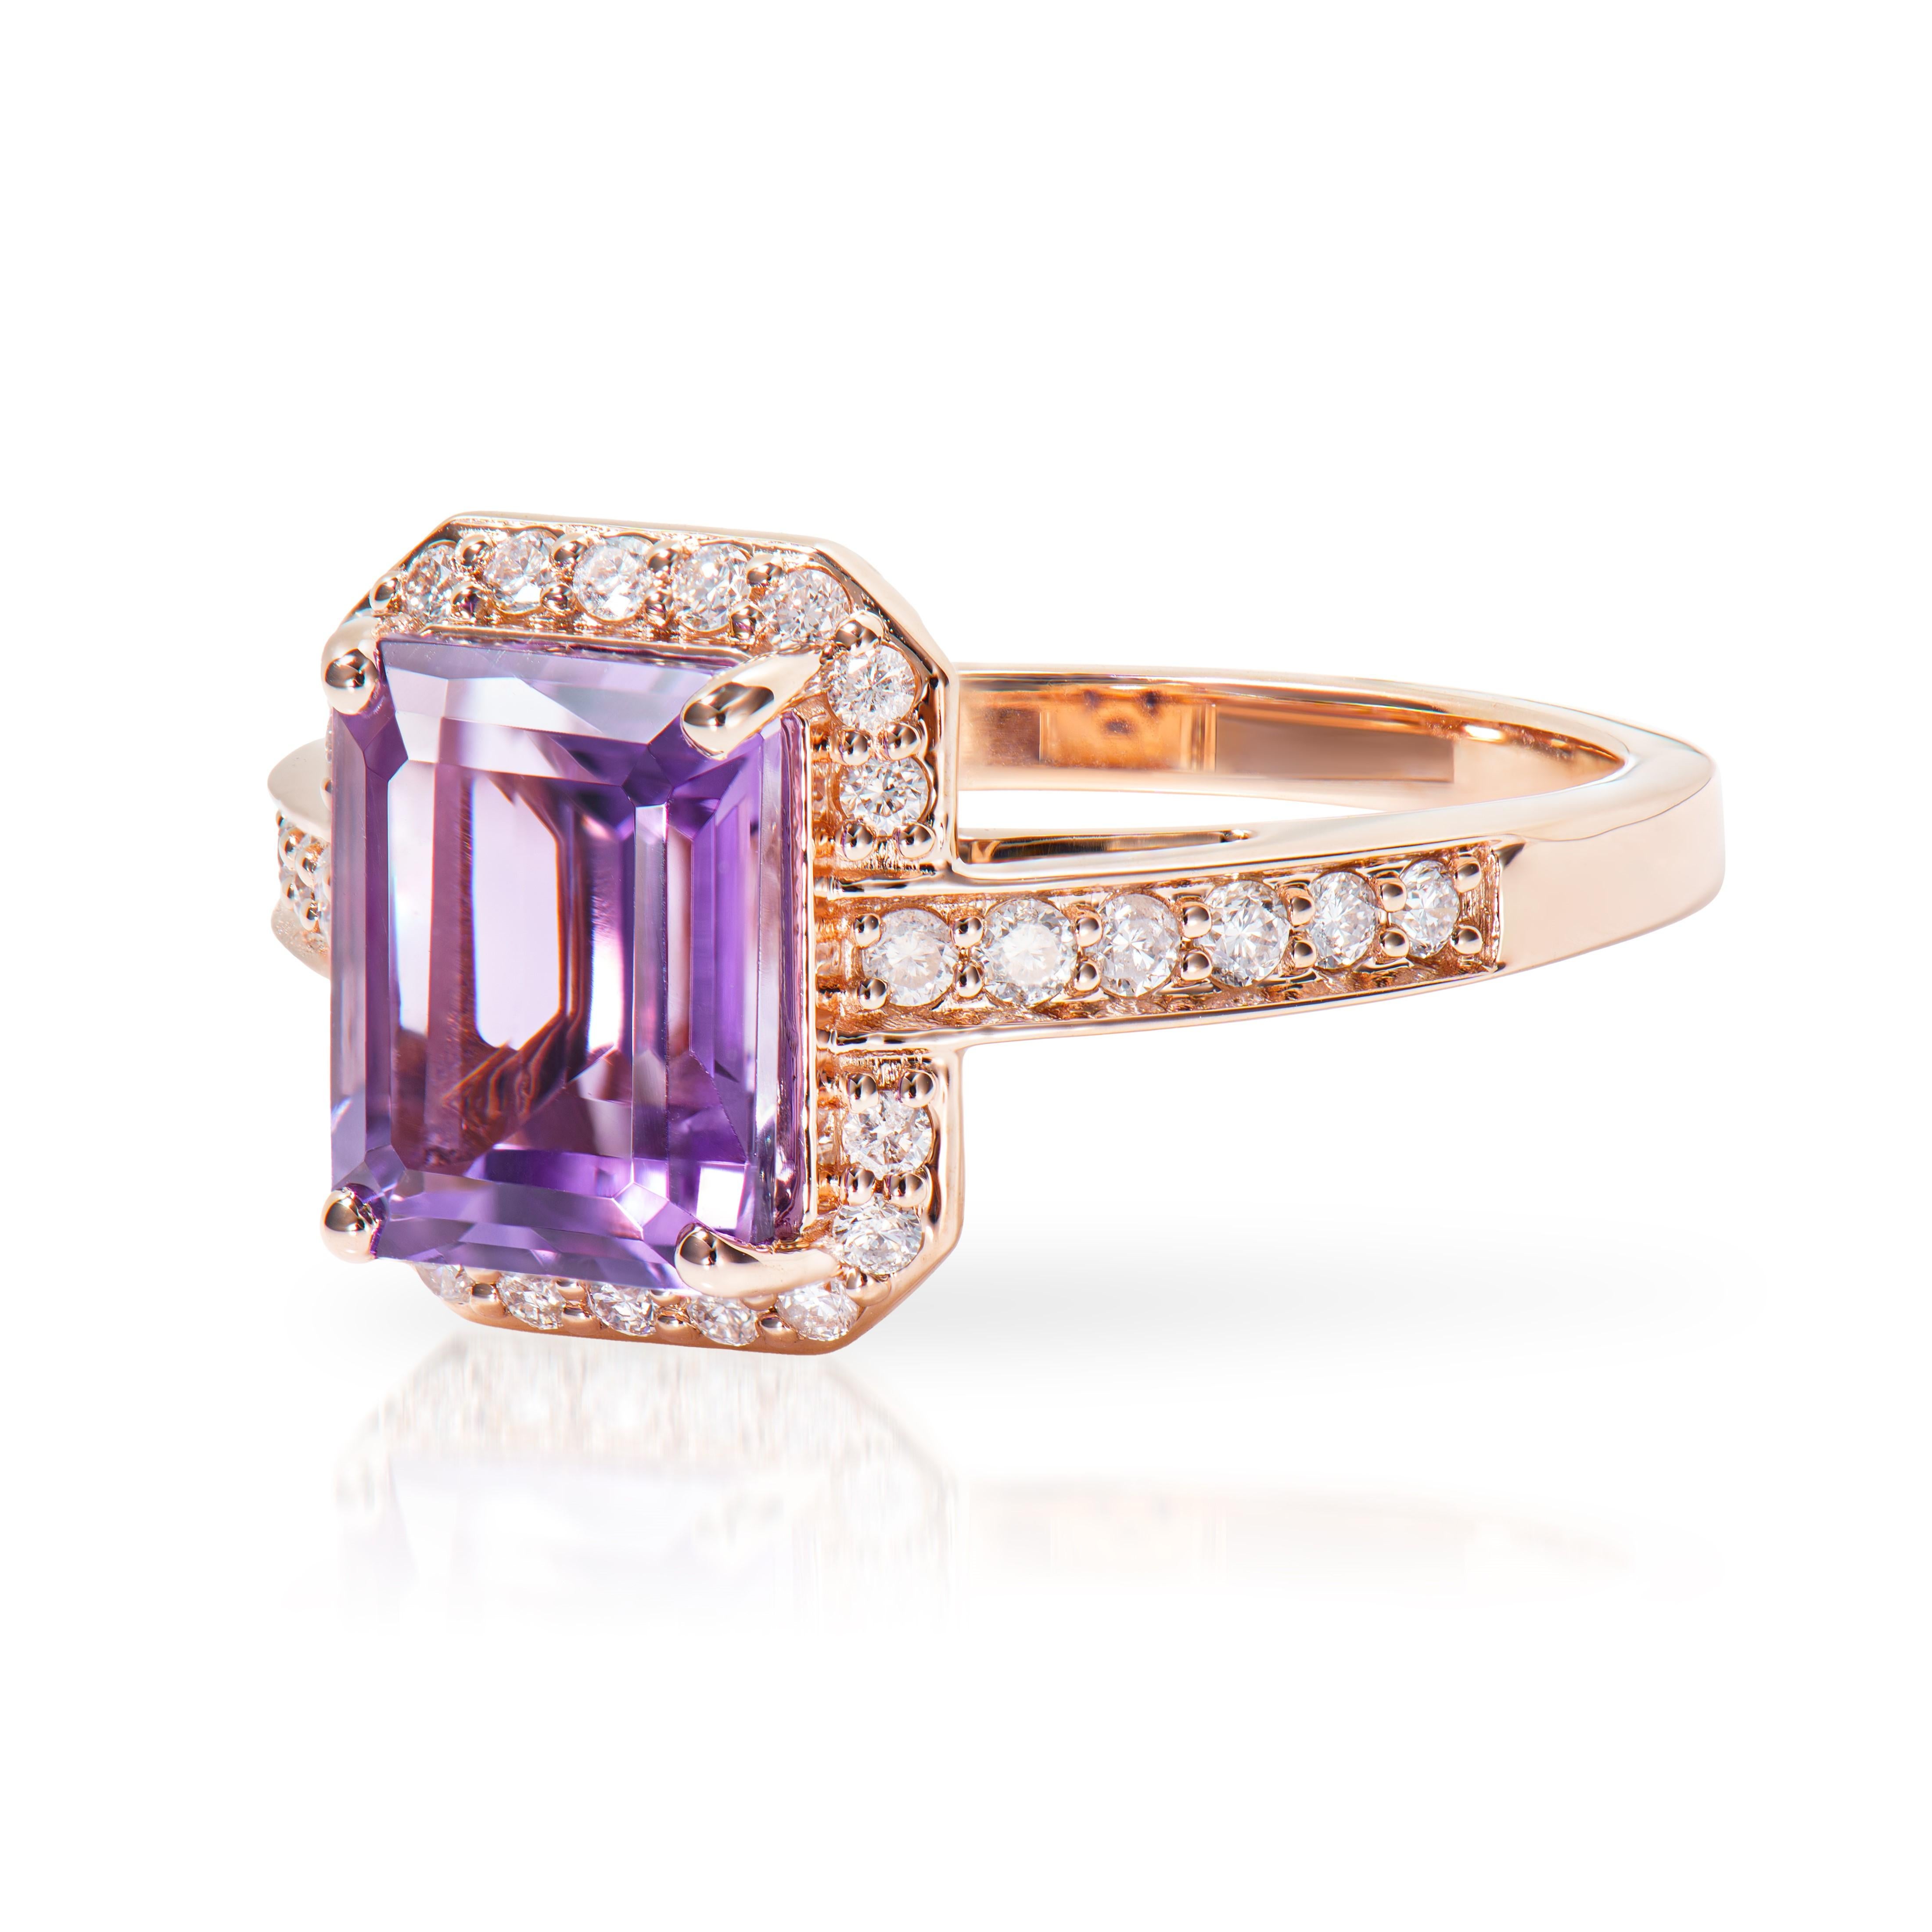 Octagon Cut 2.31 Carat Amethyst Fancy Ring in 14Karat Rose Gold with White Diamond.   For Sale